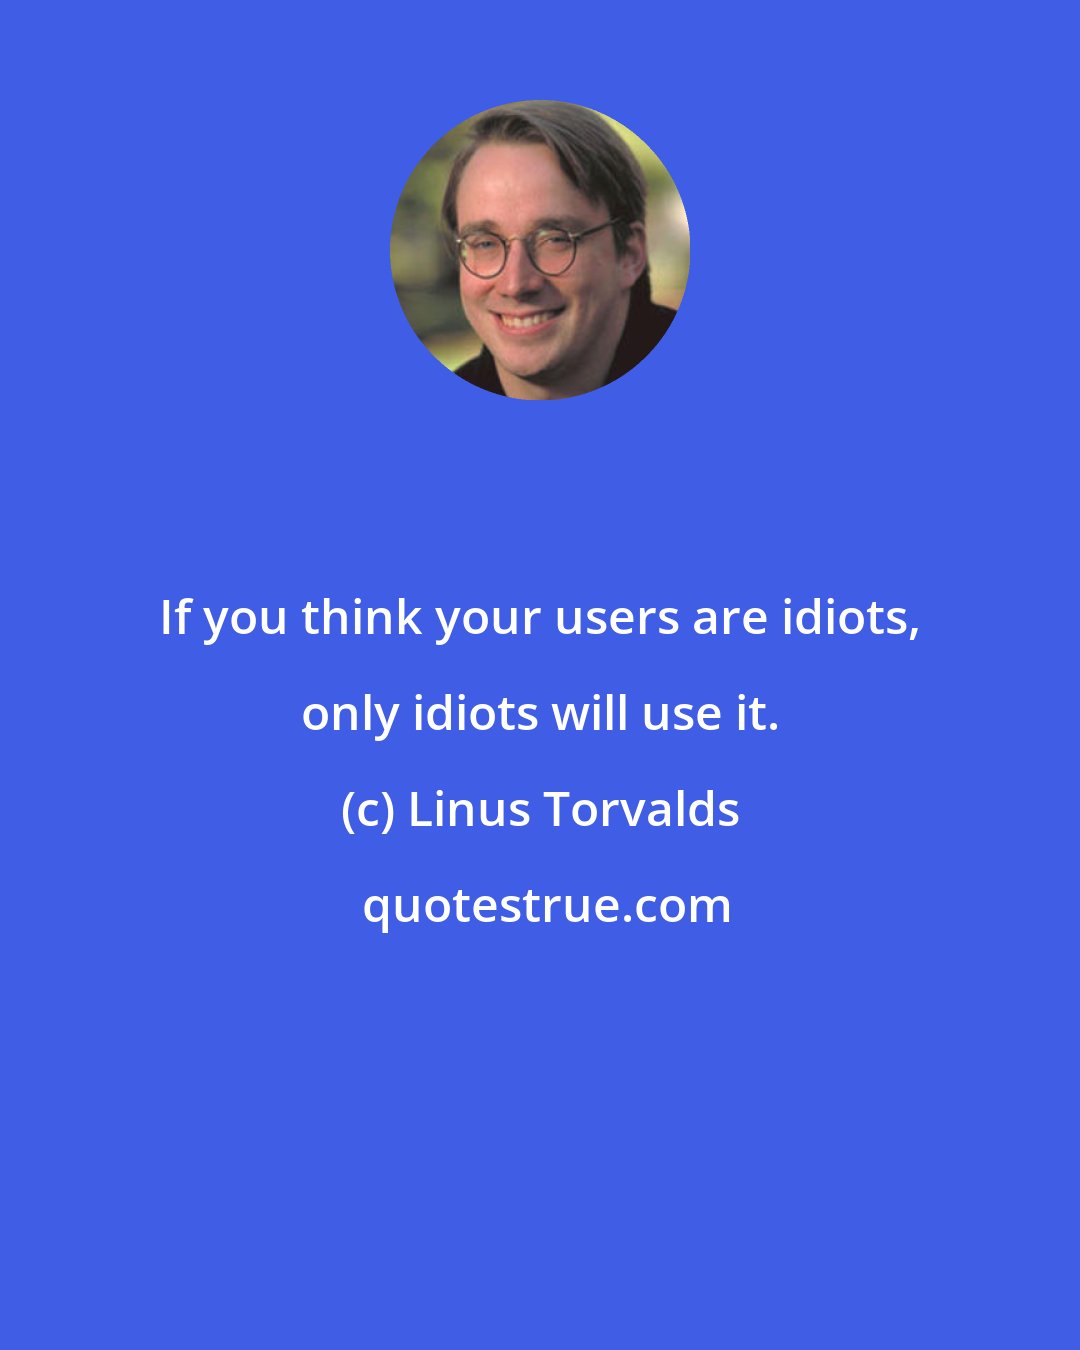 Linus Torvalds: If you think your users are idiots, only idiots will use it.